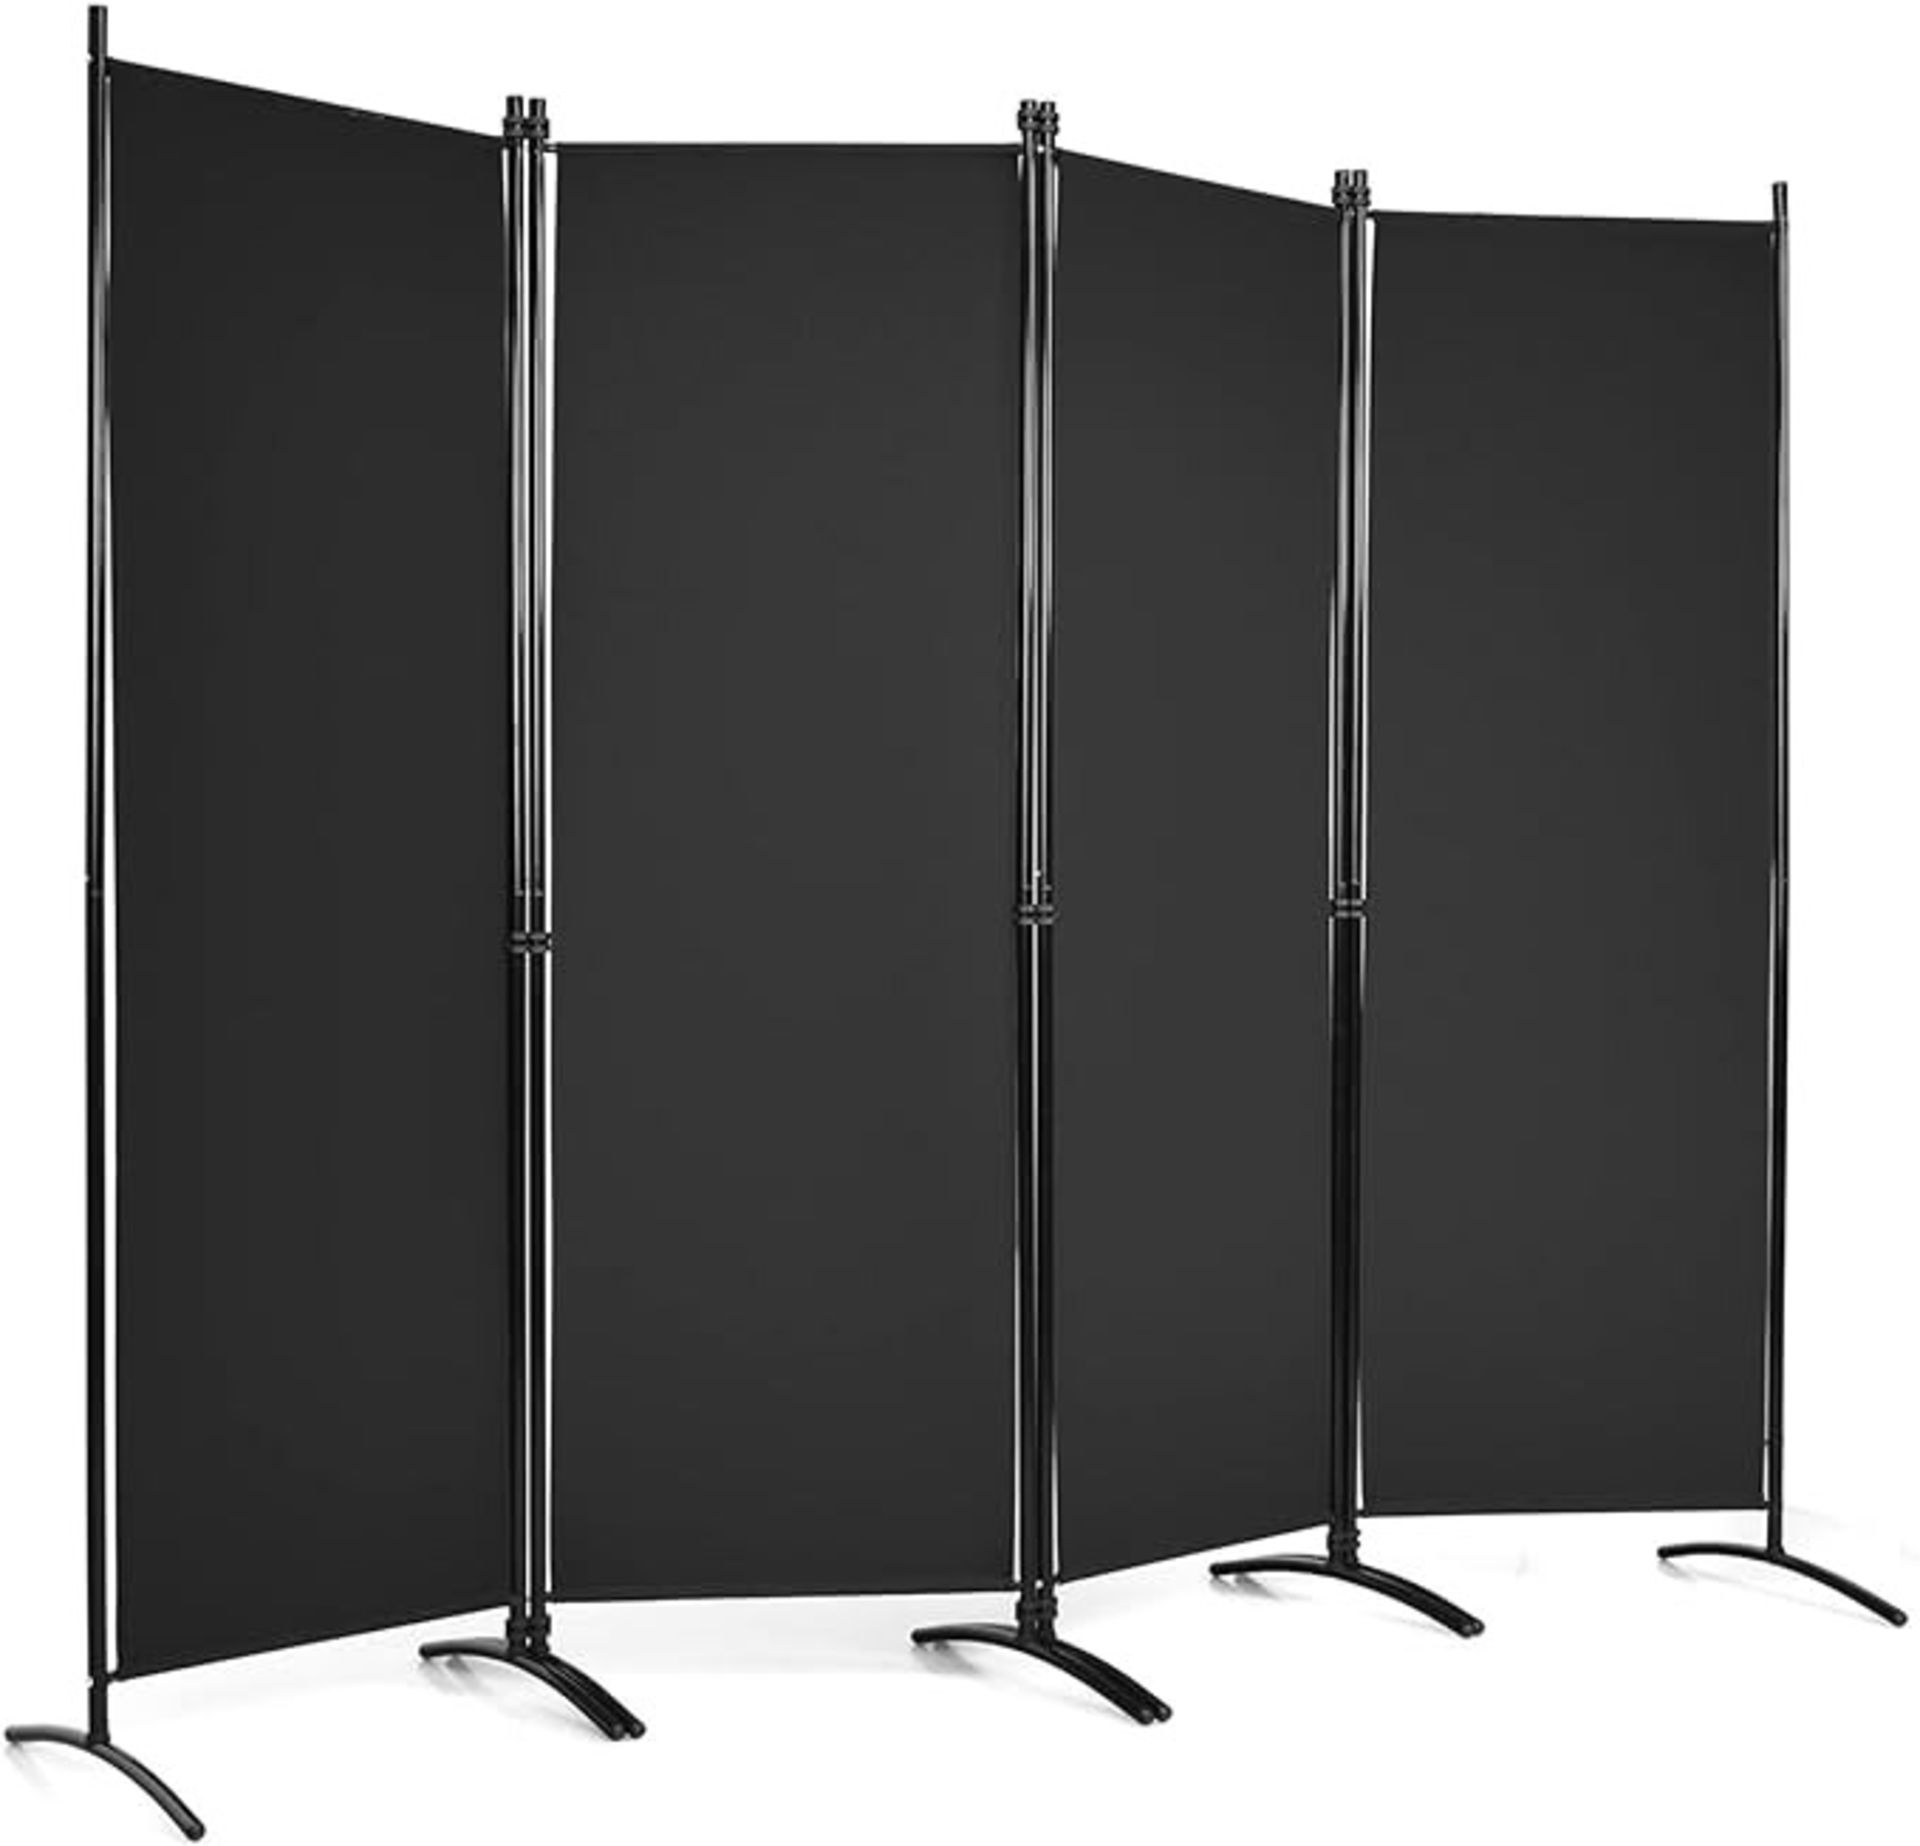 Folding Room Divider, 1/4 Panel Freestanding Wall Privacy Screen Protector - ER53